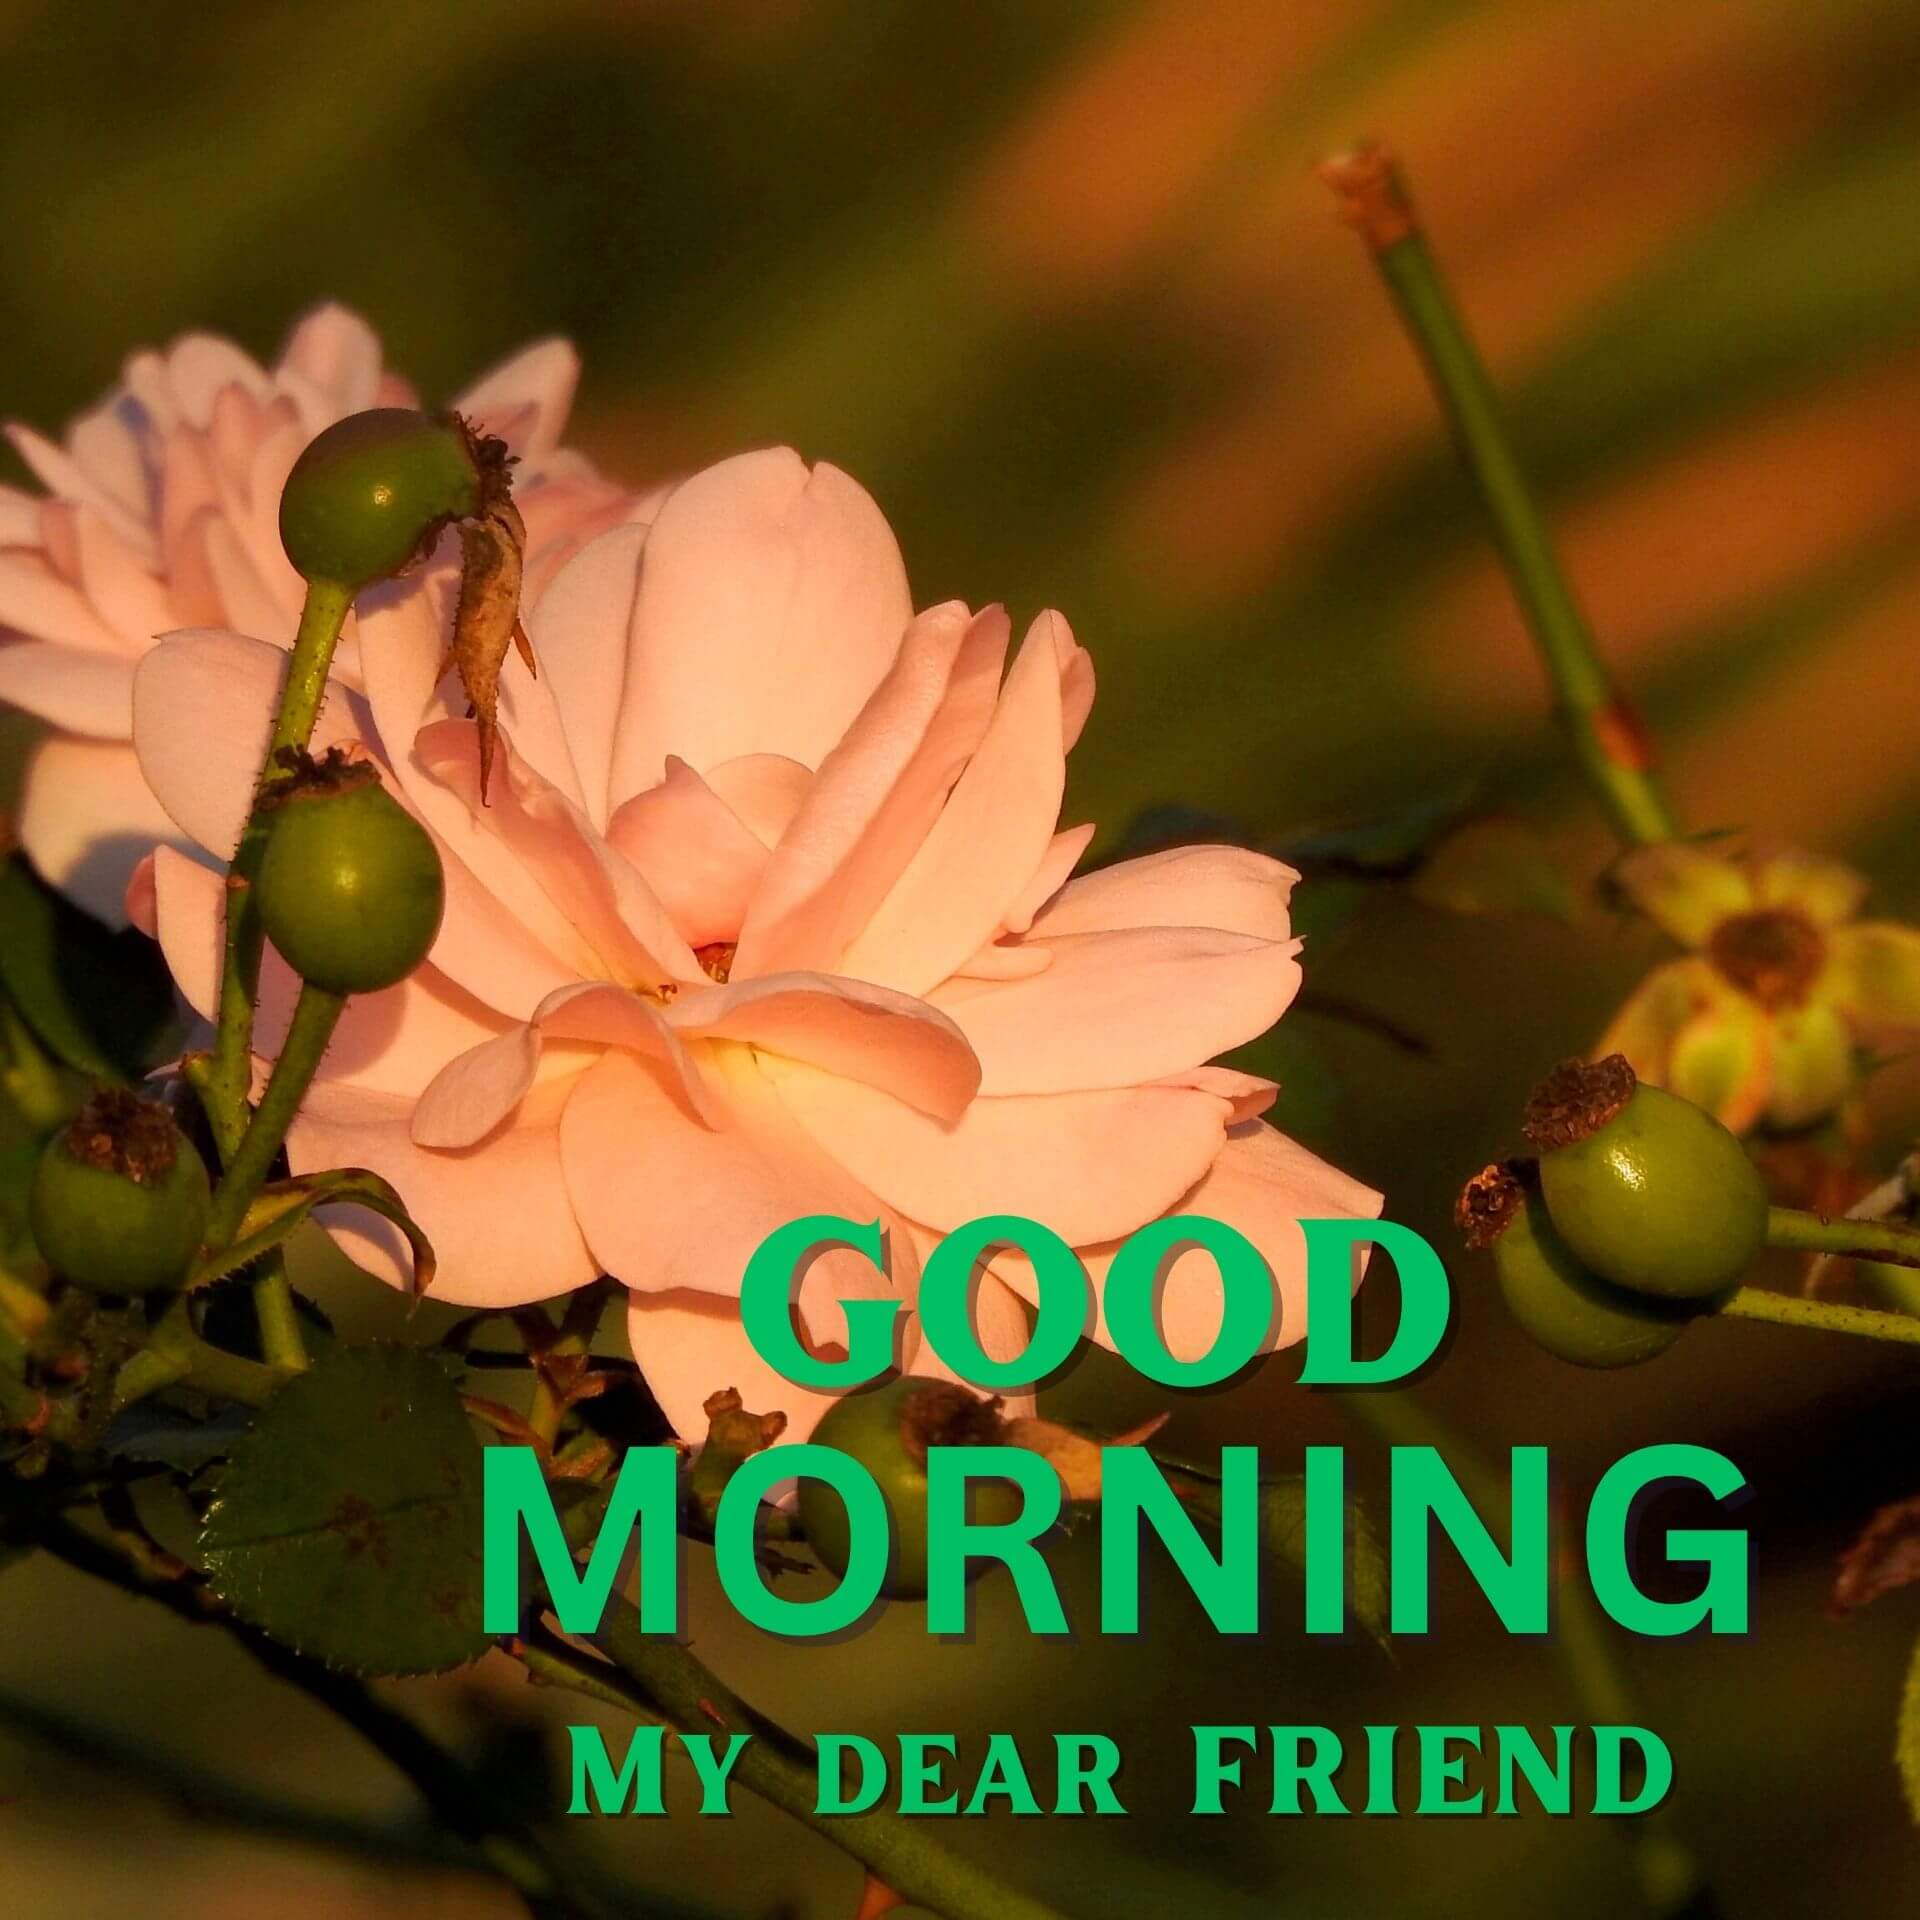 Good Morning Wallpaper Pics pictures Download